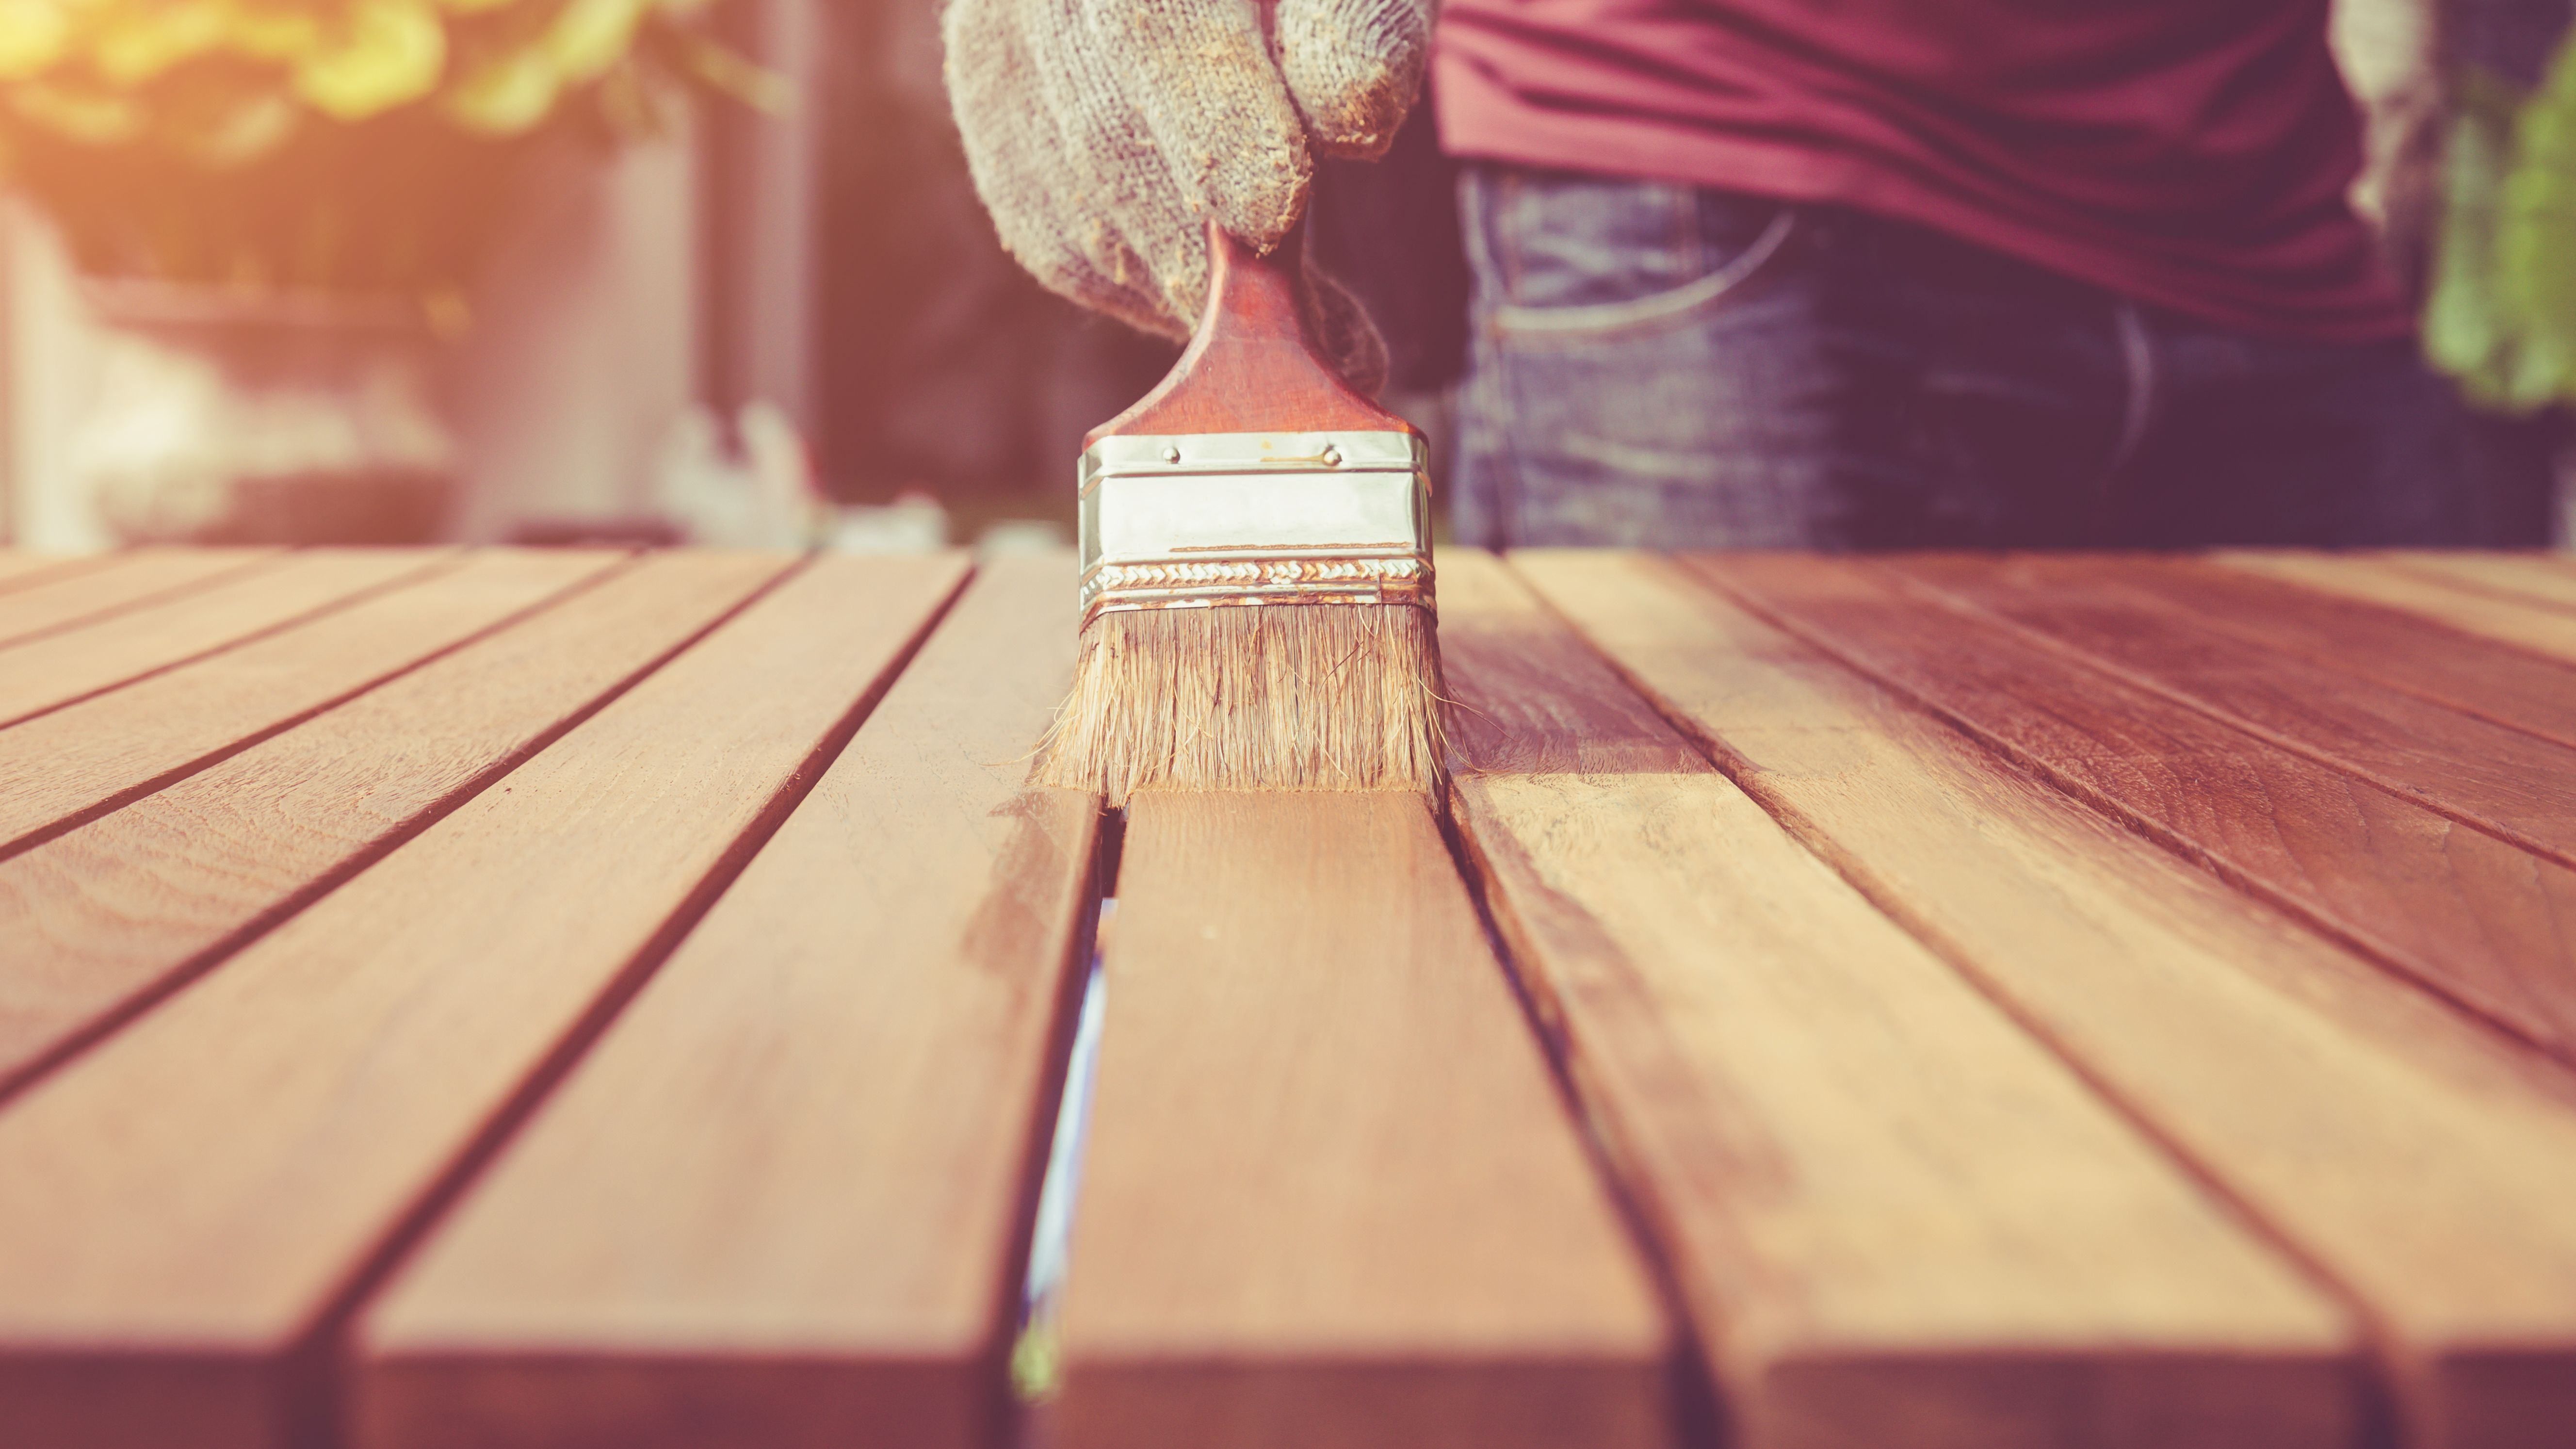 Paint vs. wood stain: which is right for you?